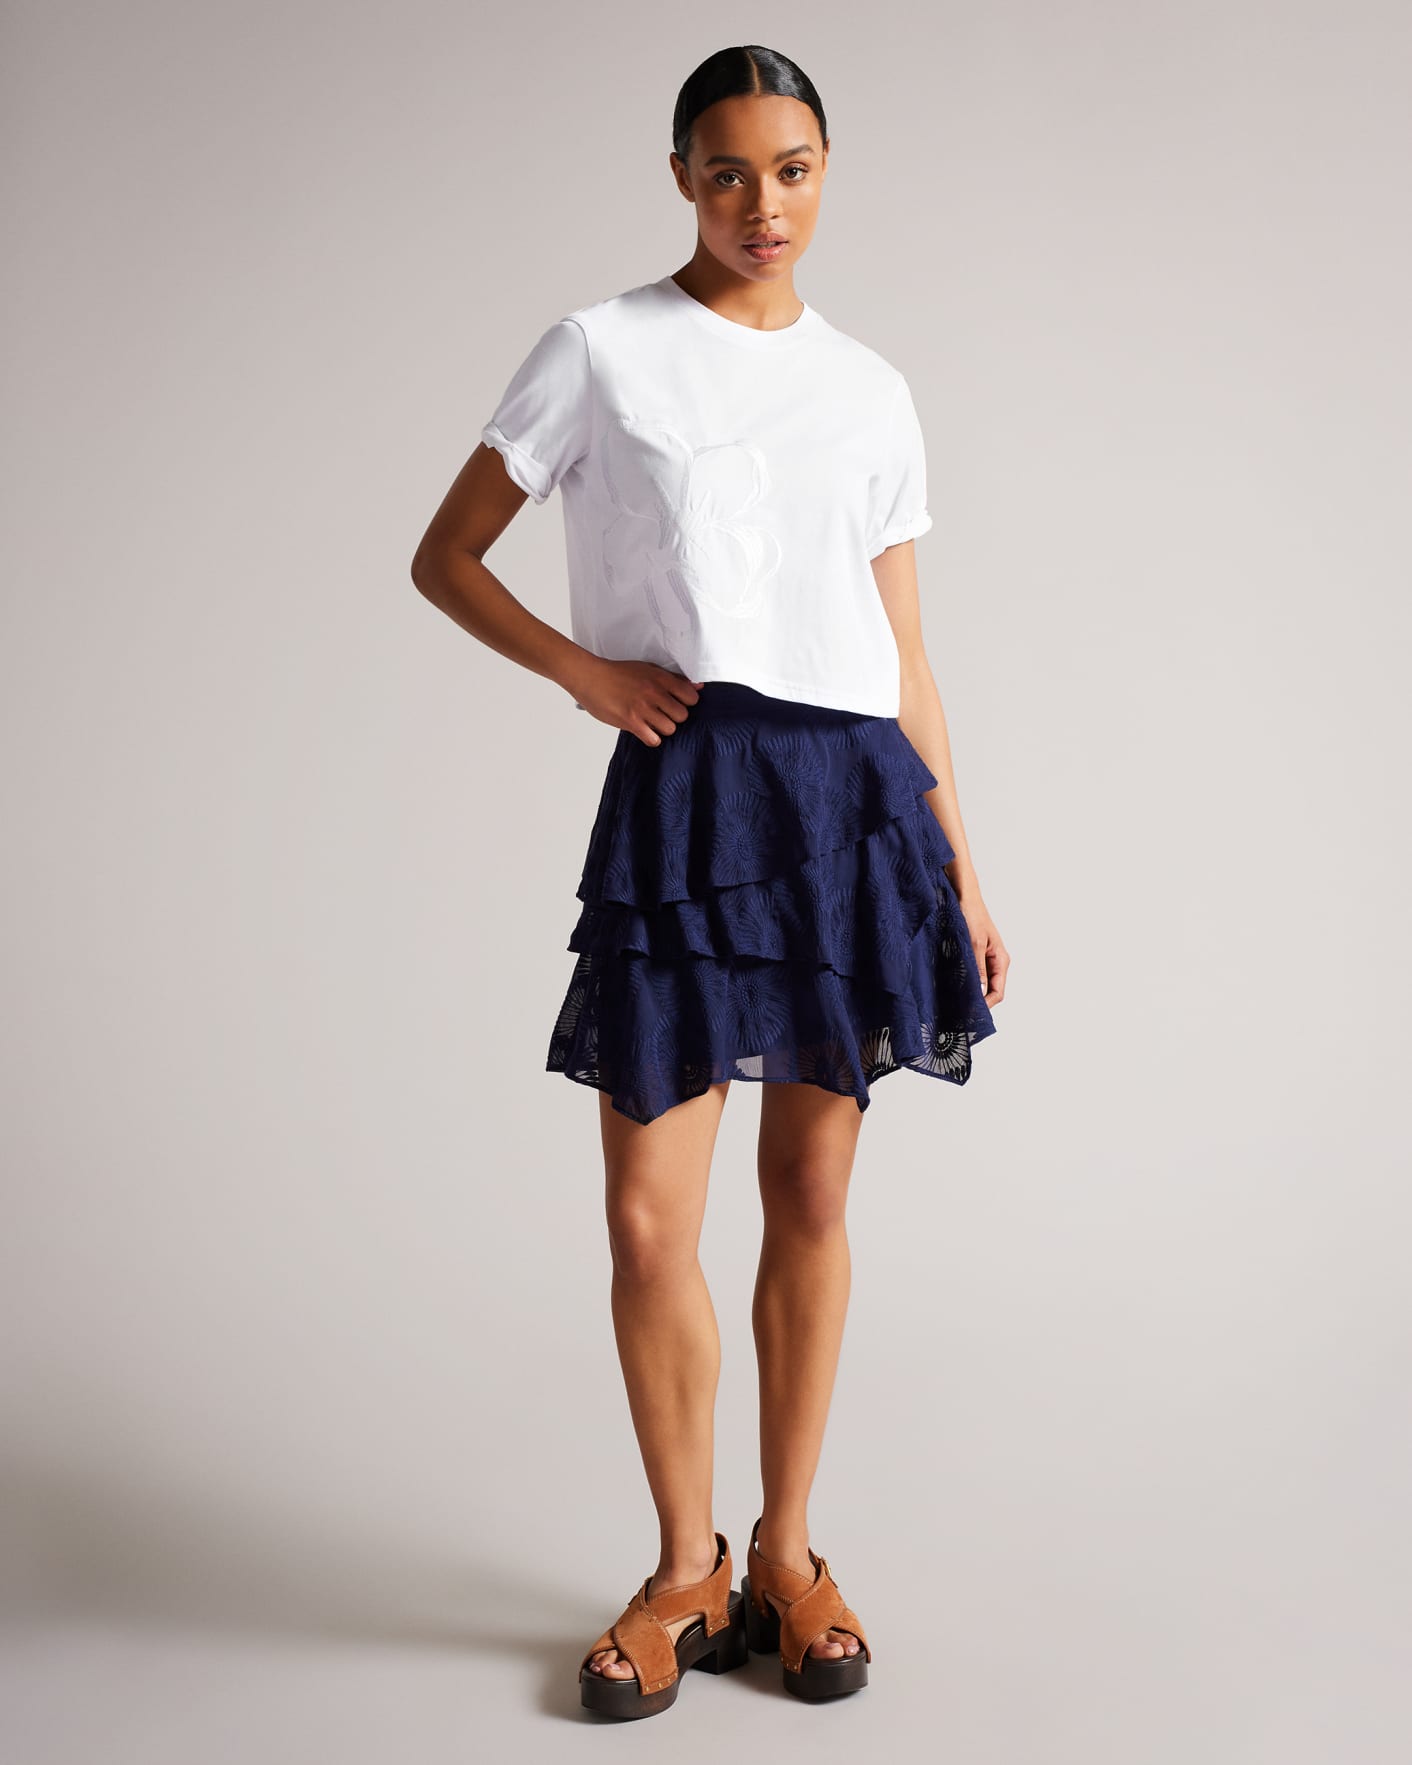 White Roll Sleeve Tee With Satin Stitch Magnolia Ted Baker